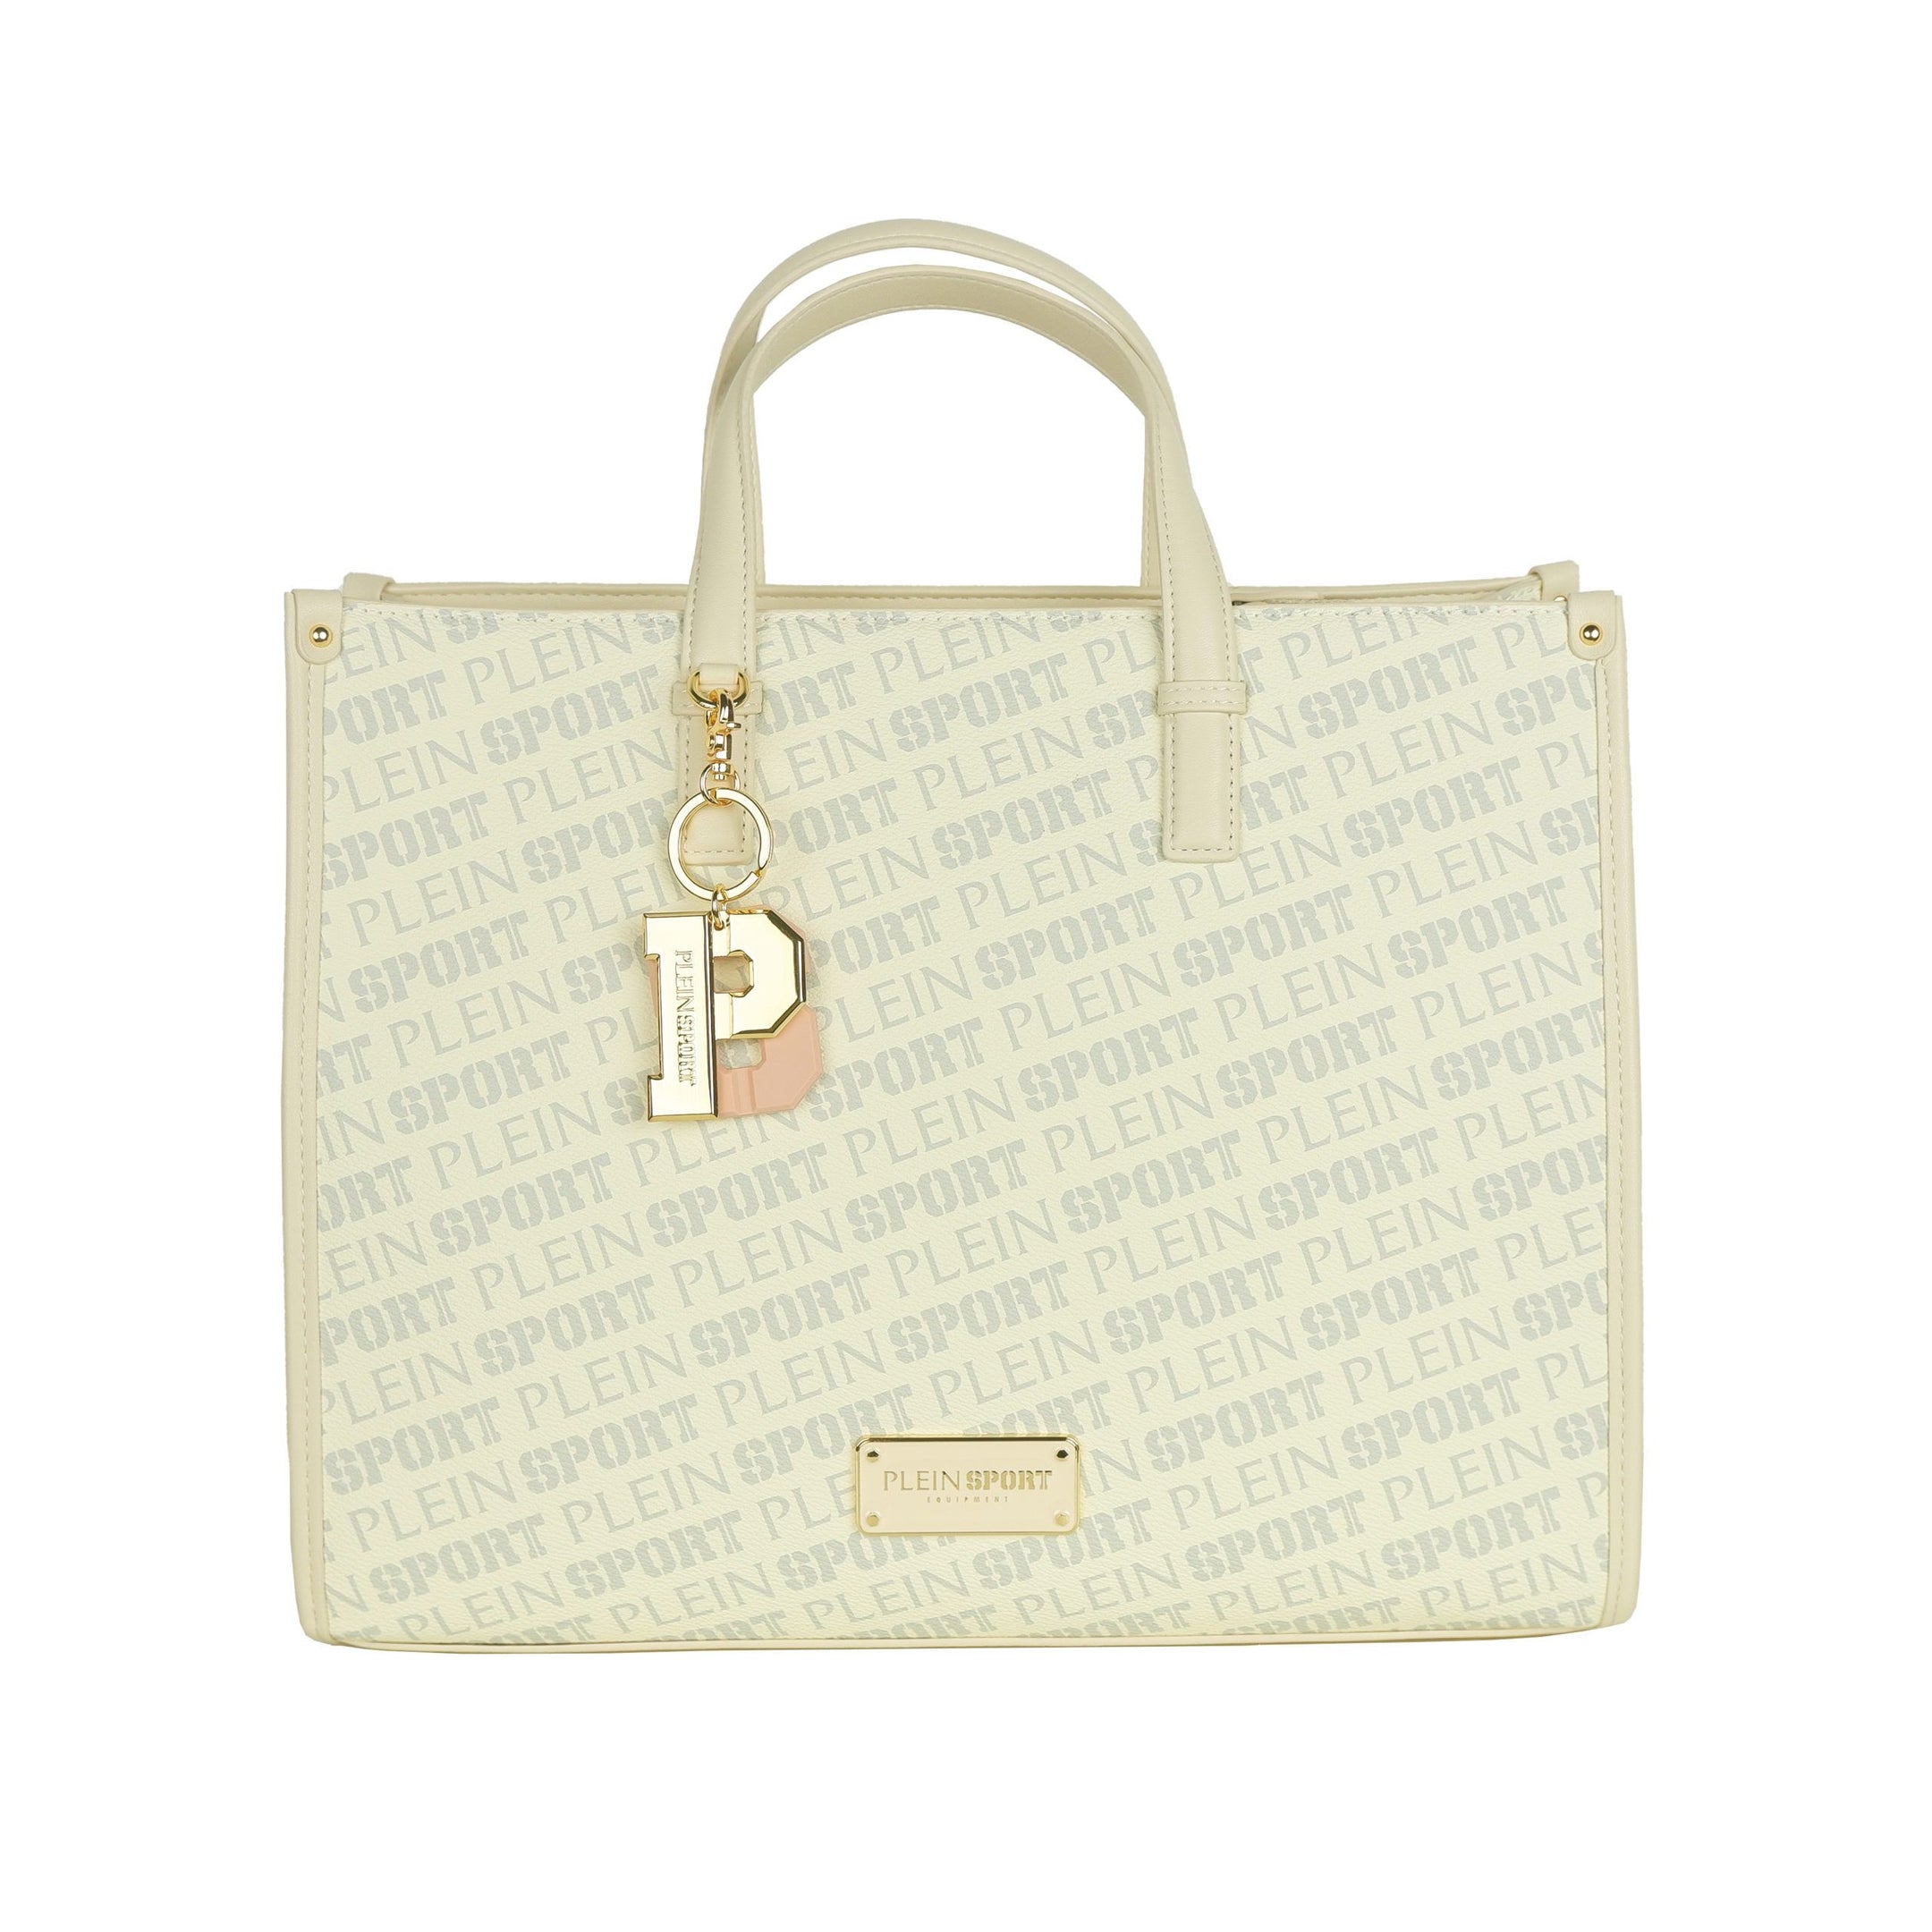 Stunning White Tote Bag with Cross Belt